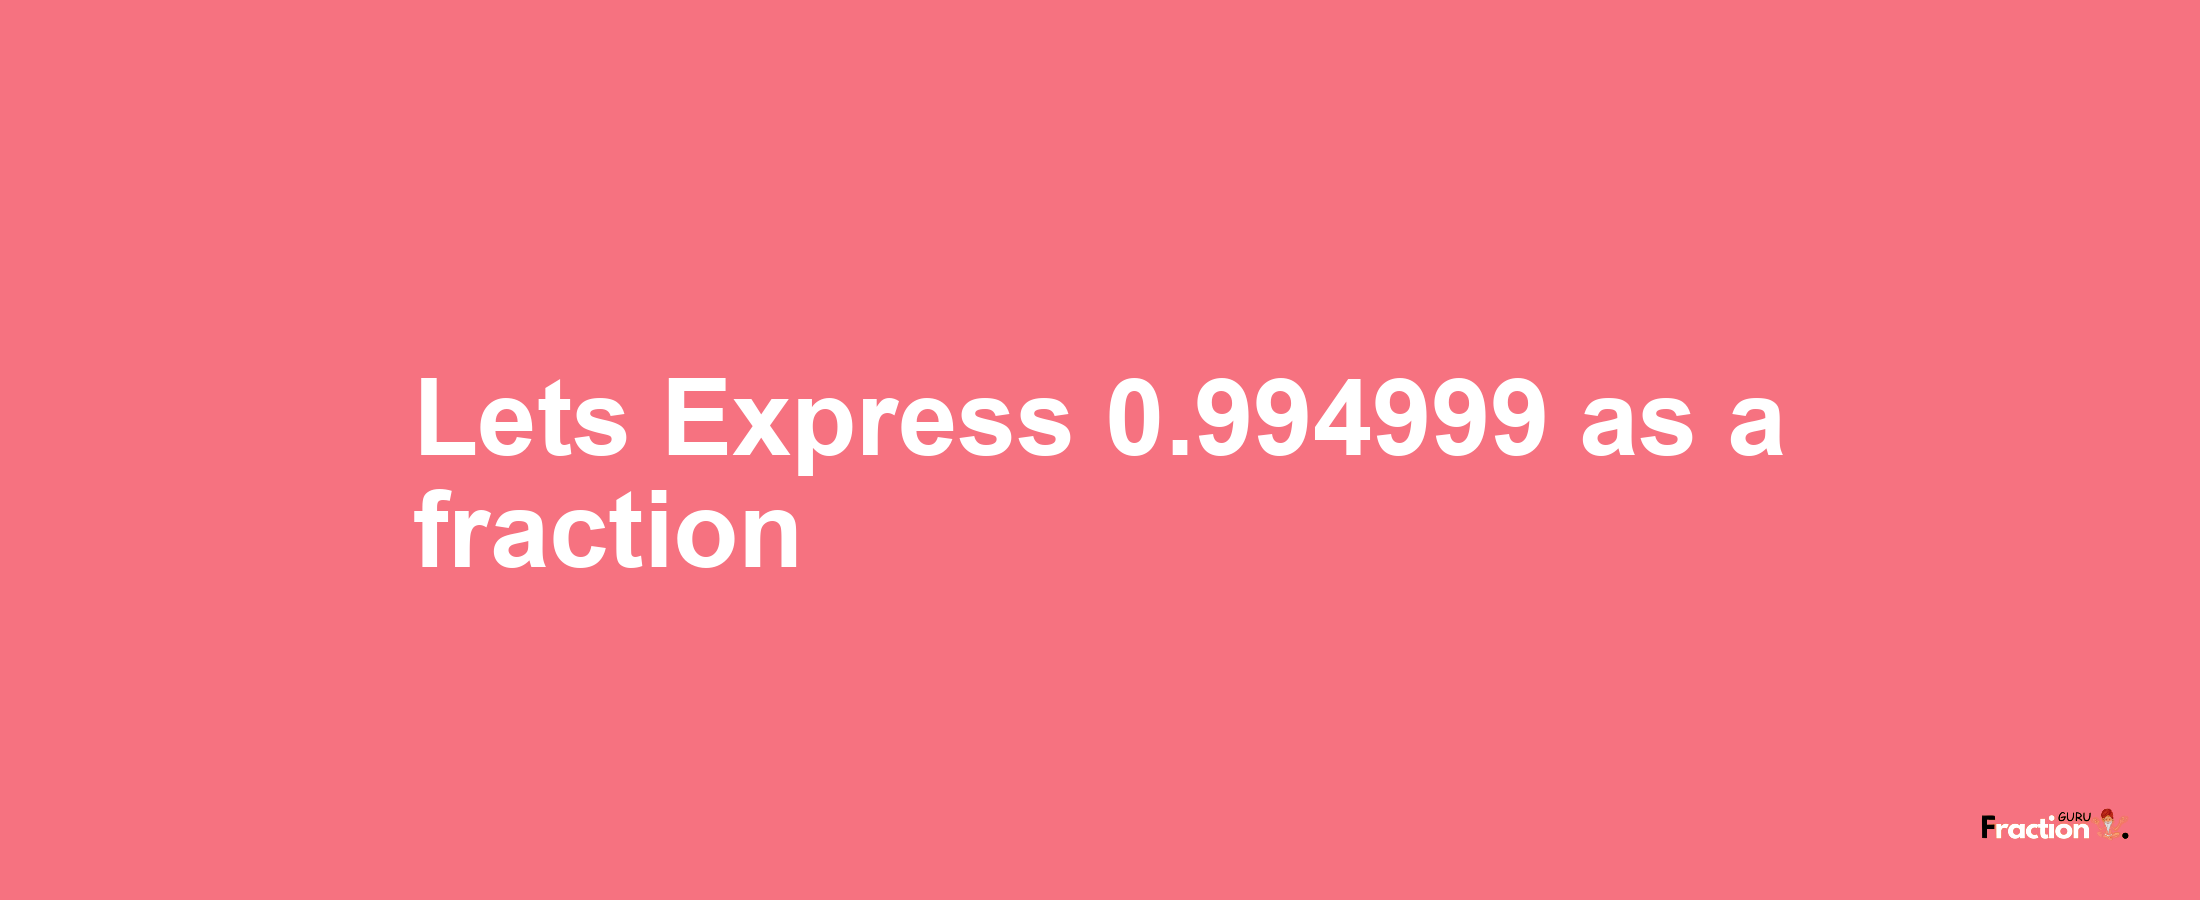 Lets Express 0.994999 as afraction